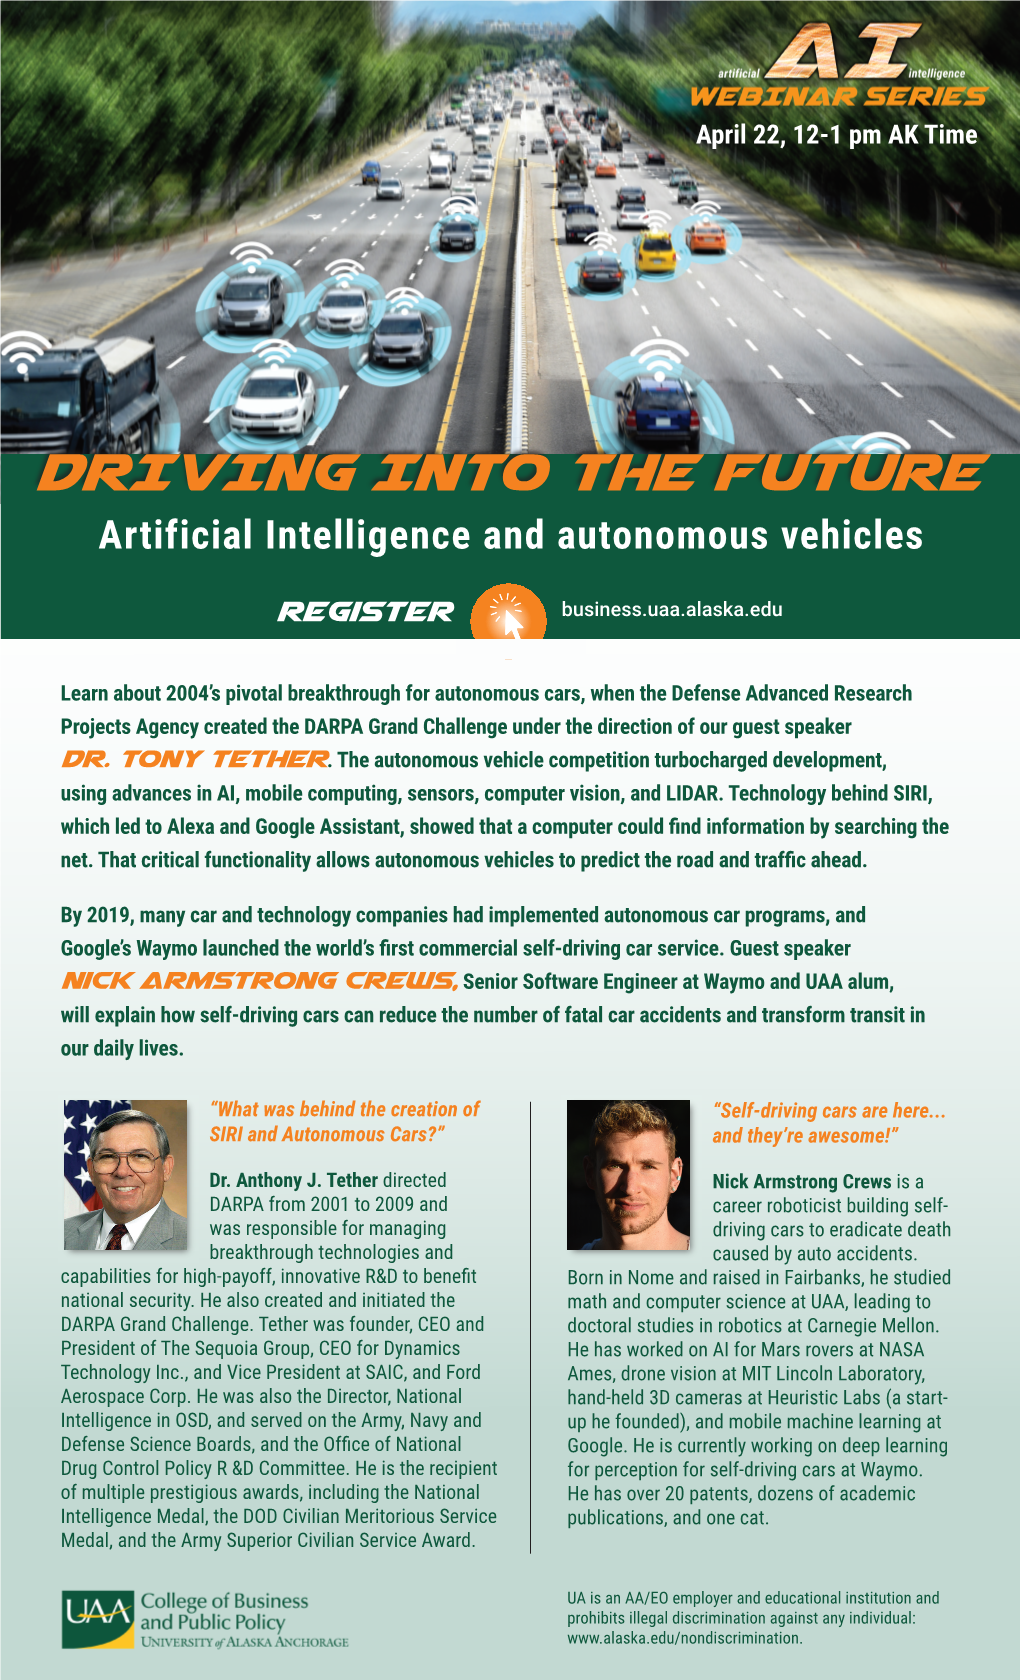 DRIVING INTO the FUTURE Artificial Intelligence and Autonomous Vehicles